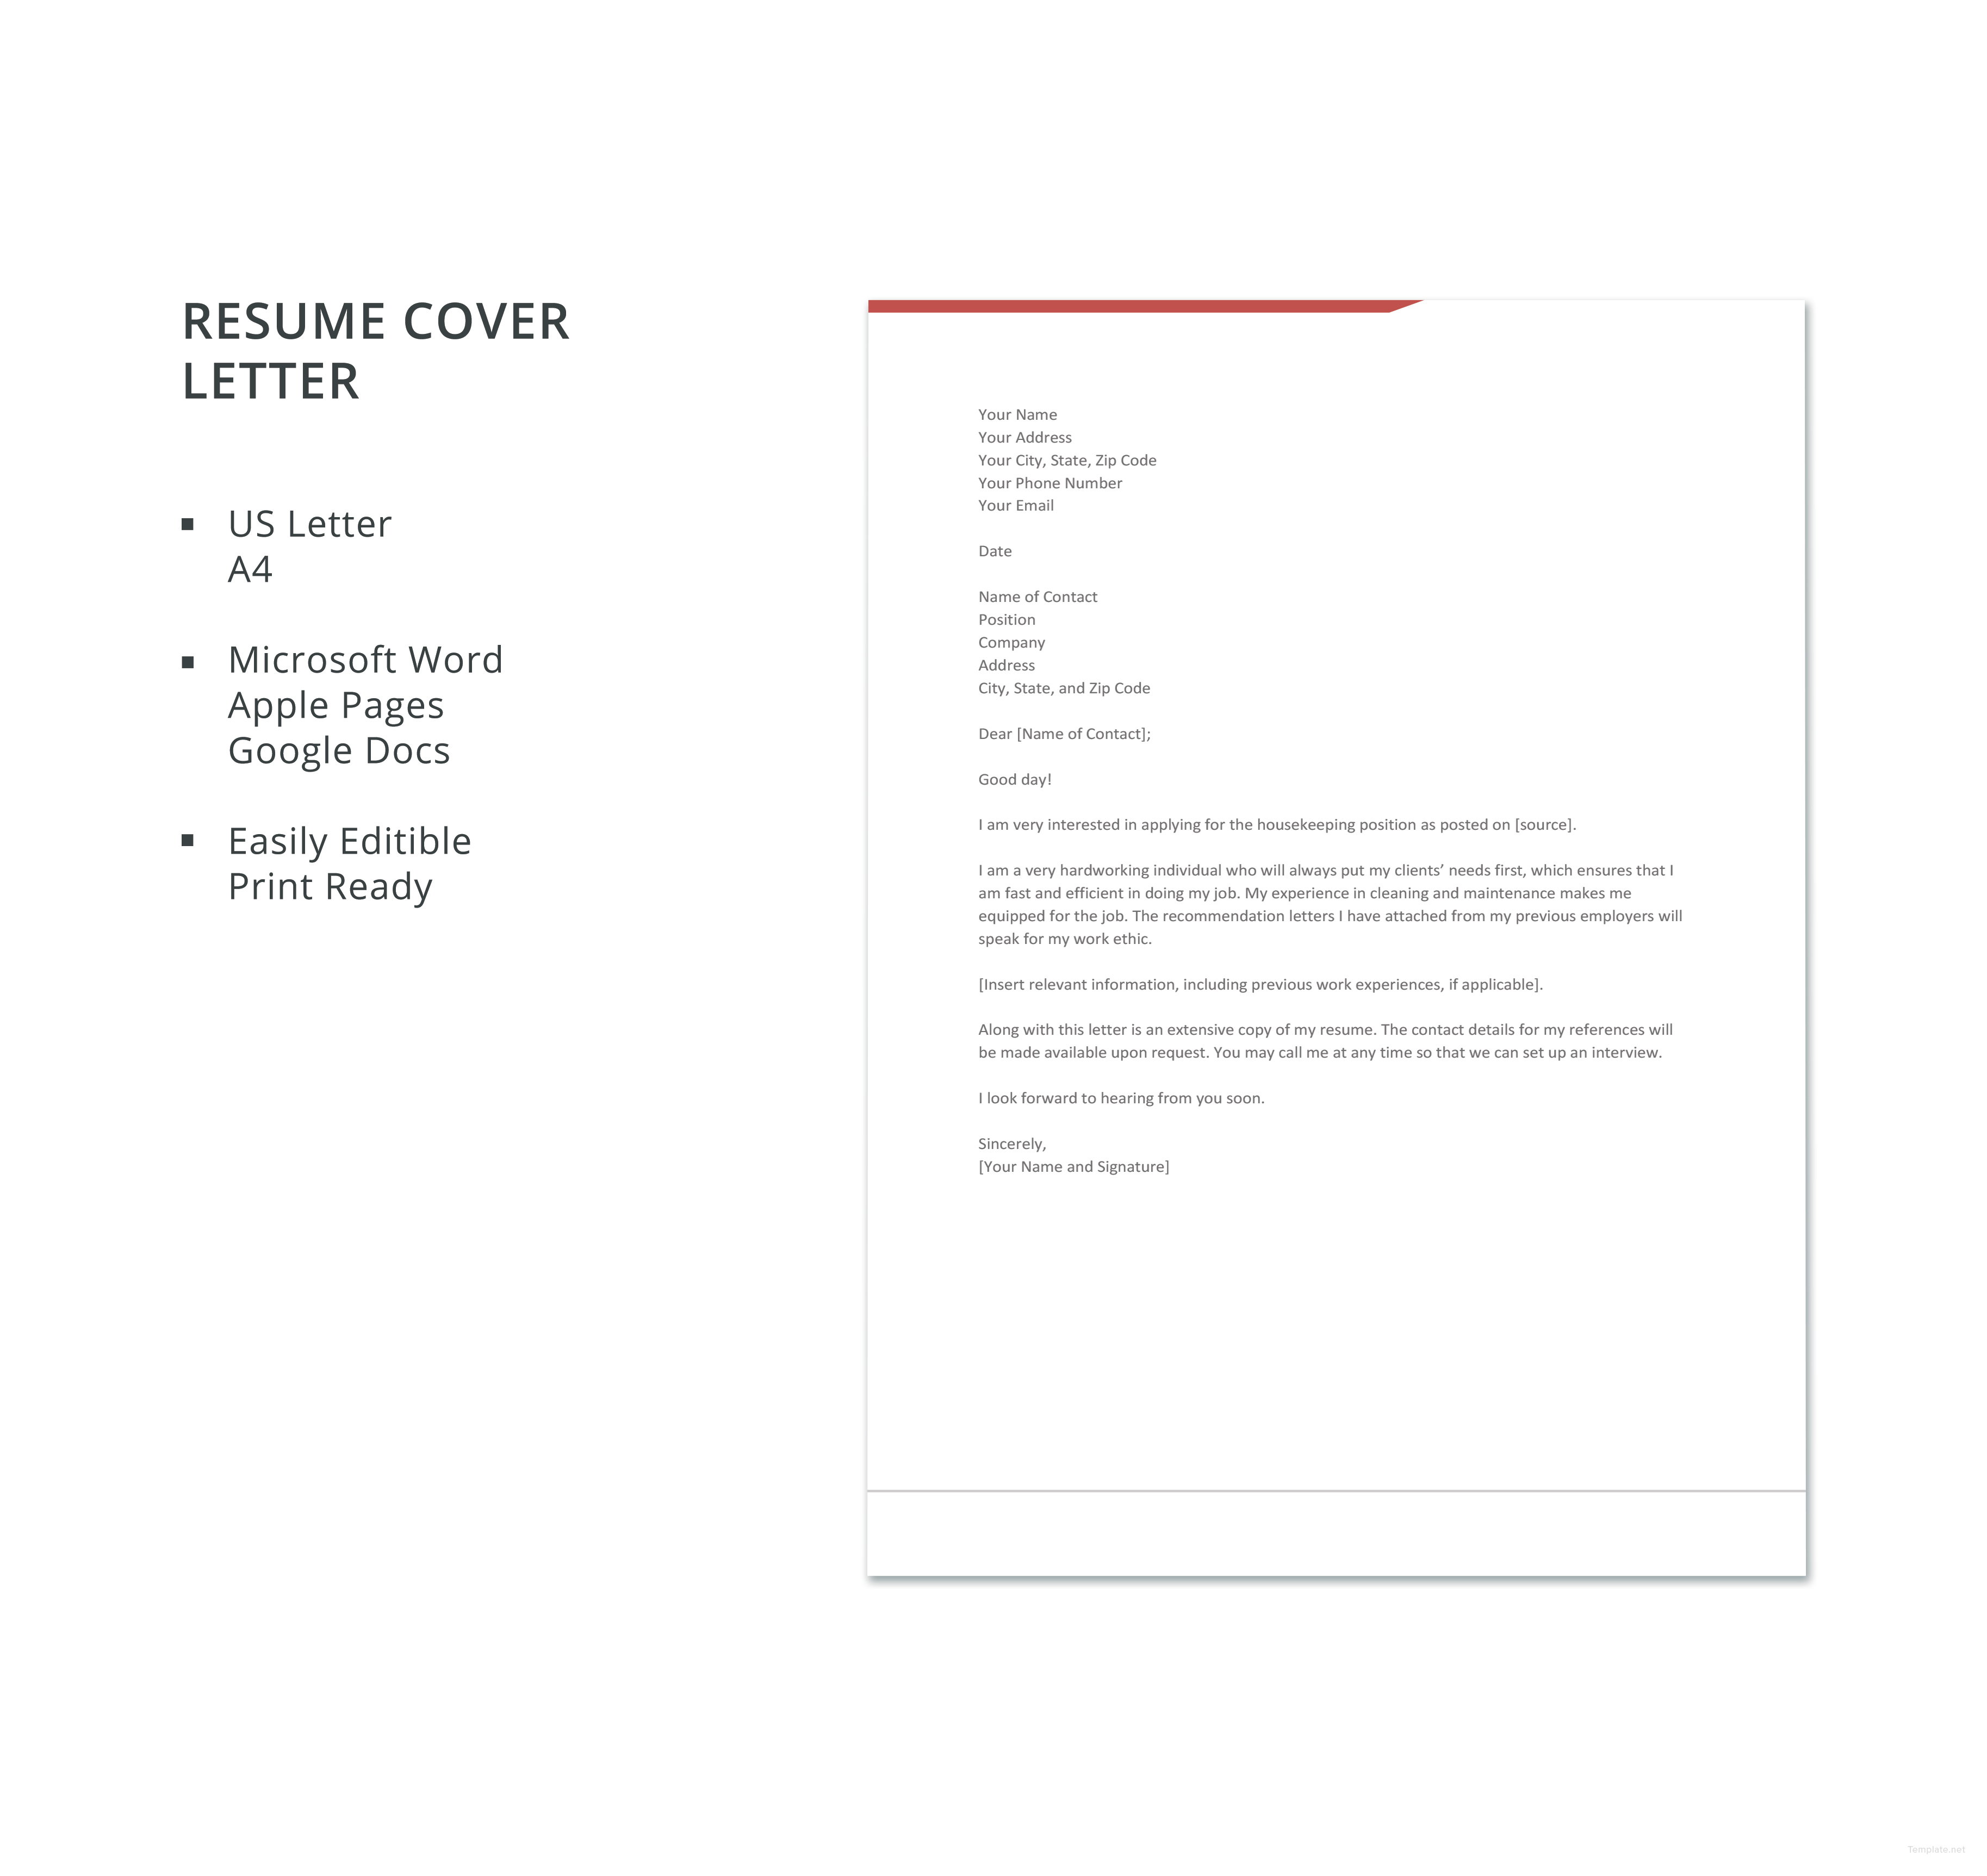 Free Housekeeping Resume Cover Letter Template in ...